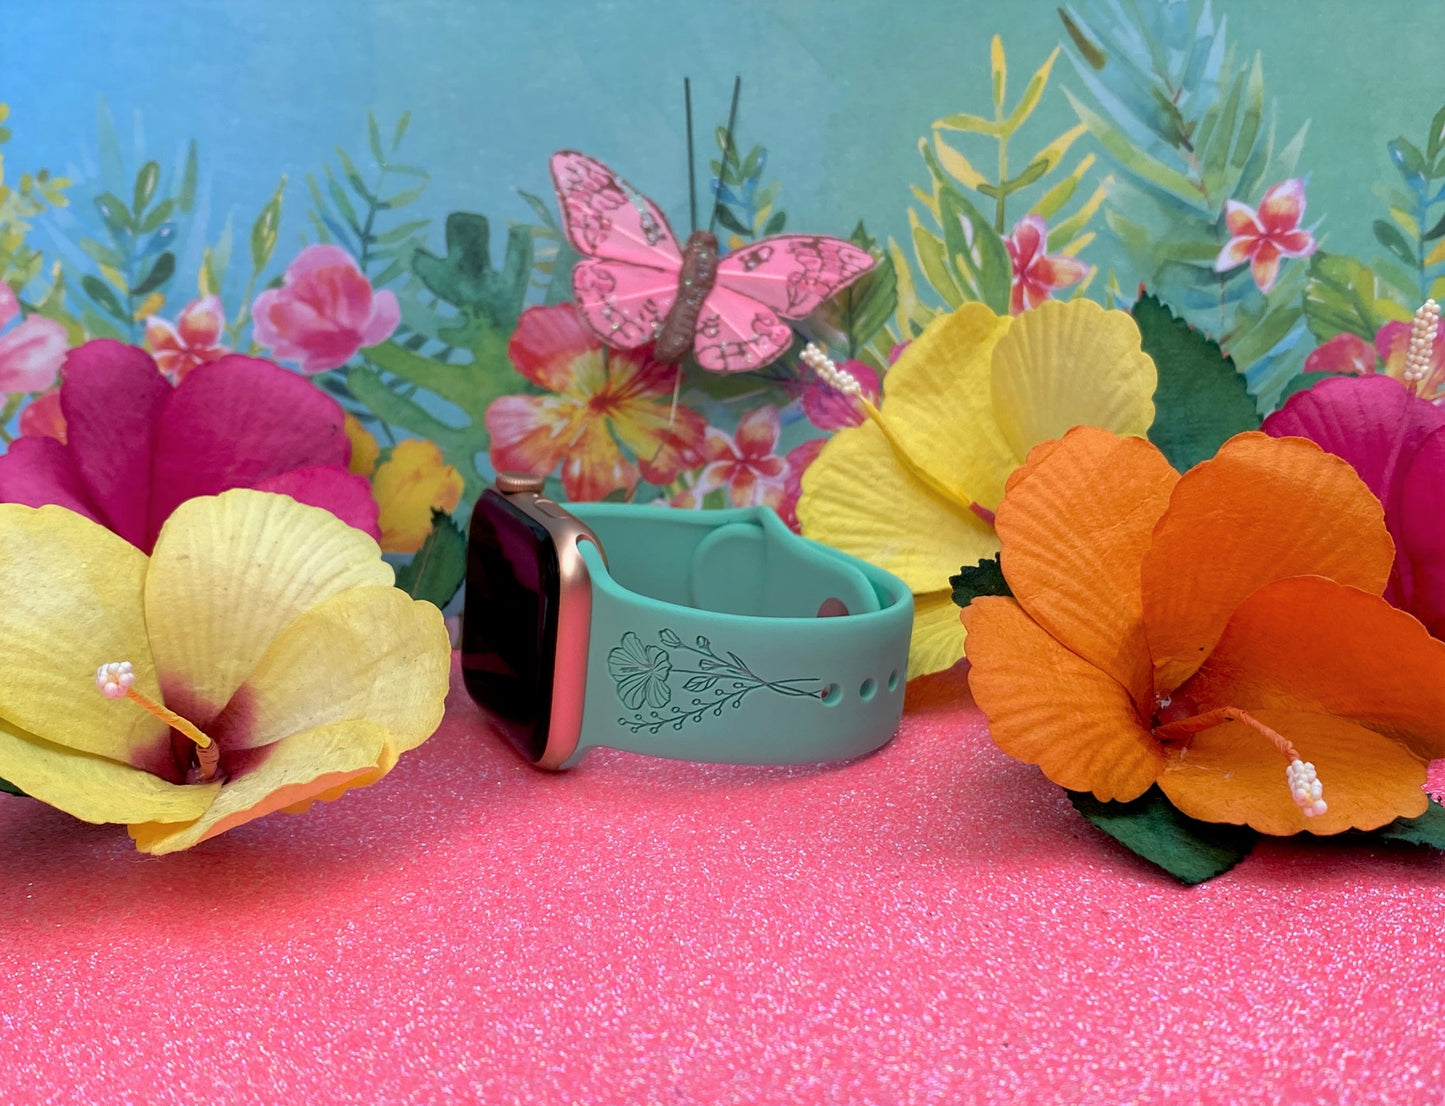 Hibiscus and Plumeria Flower Apple Watch Band